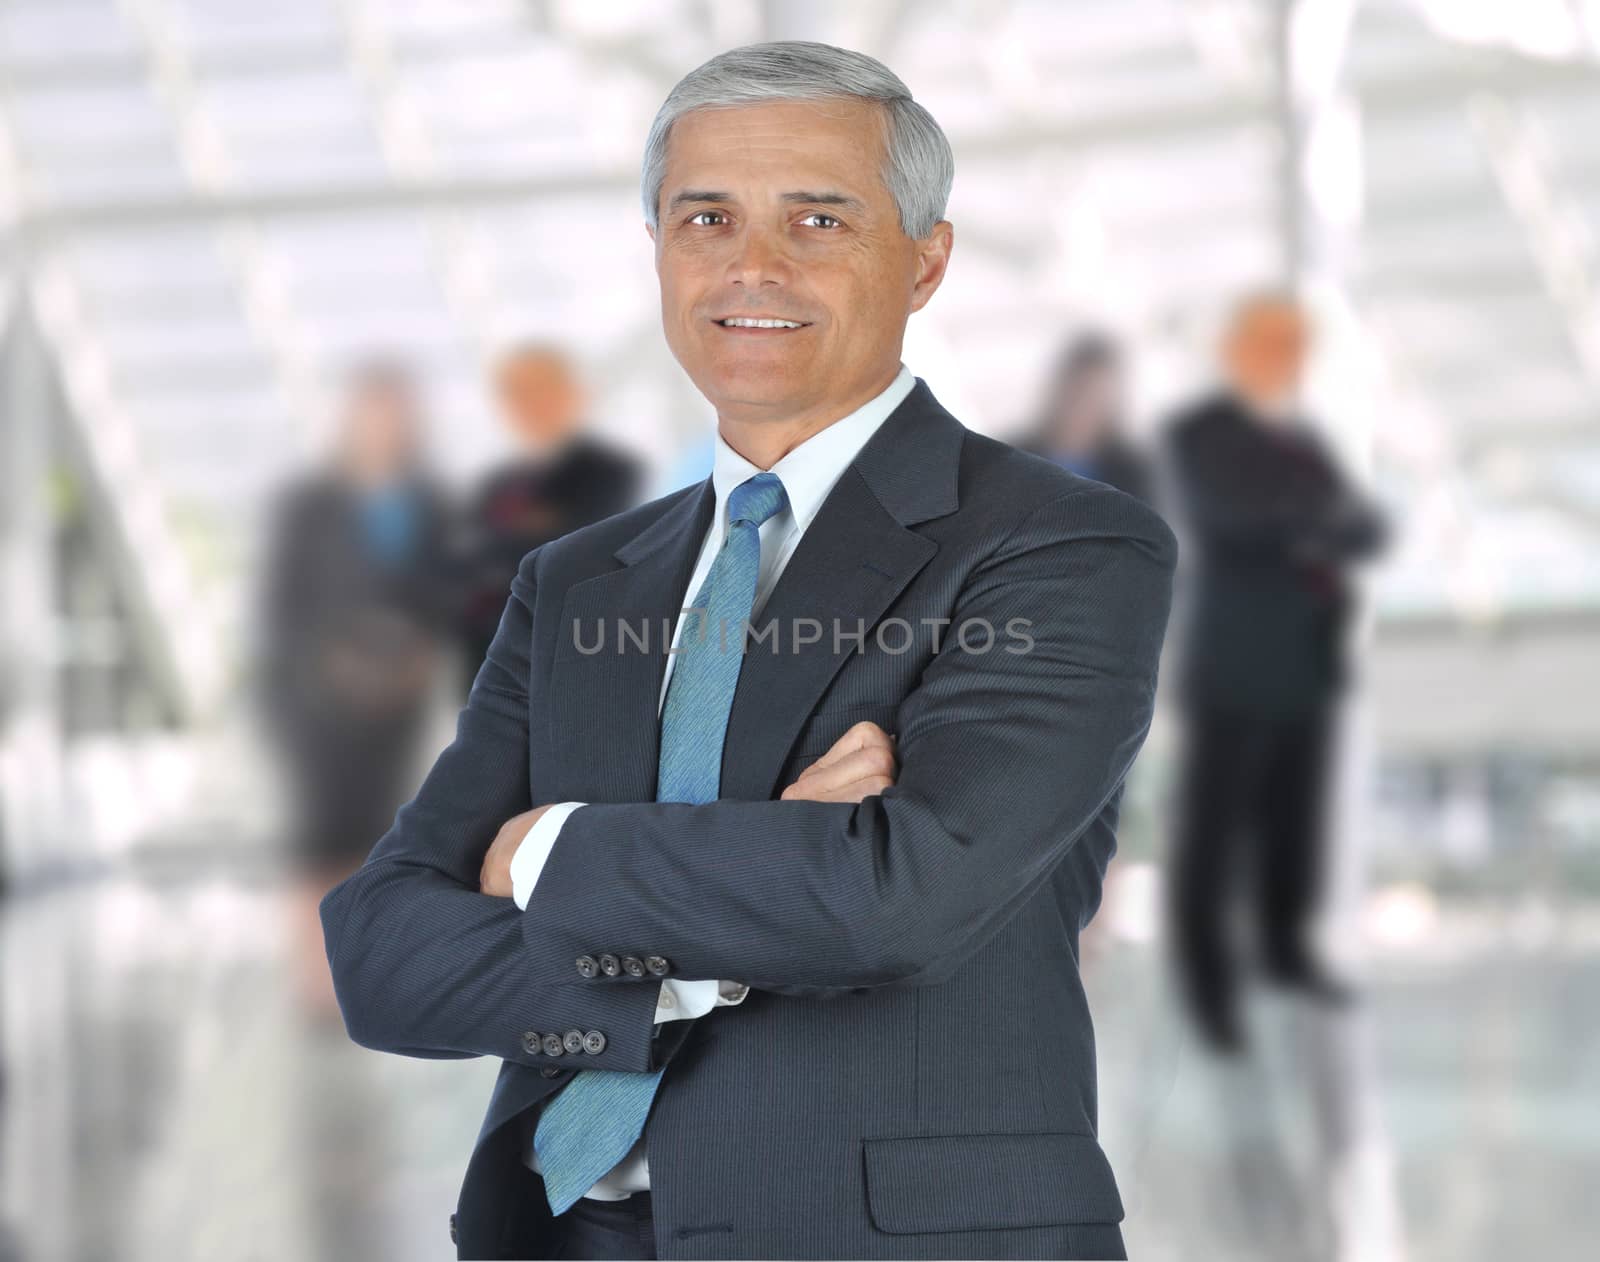 Smiling middle aged businessman in a suit and tie standing in a modern office building with his arms crossed in front of out of focus team. Square Format